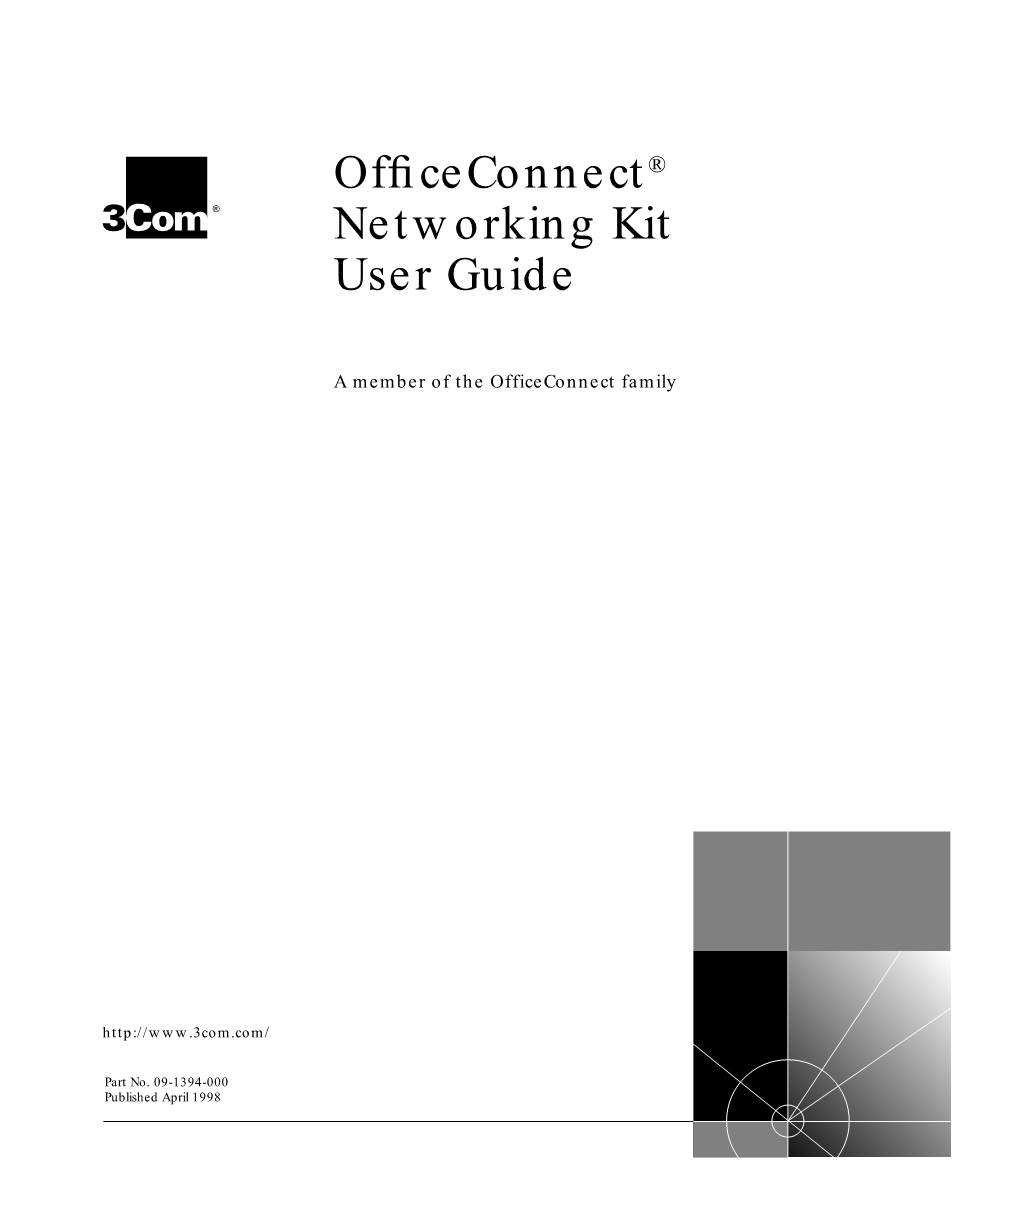 Officeconnect Networking Kit User Guide, 4/98